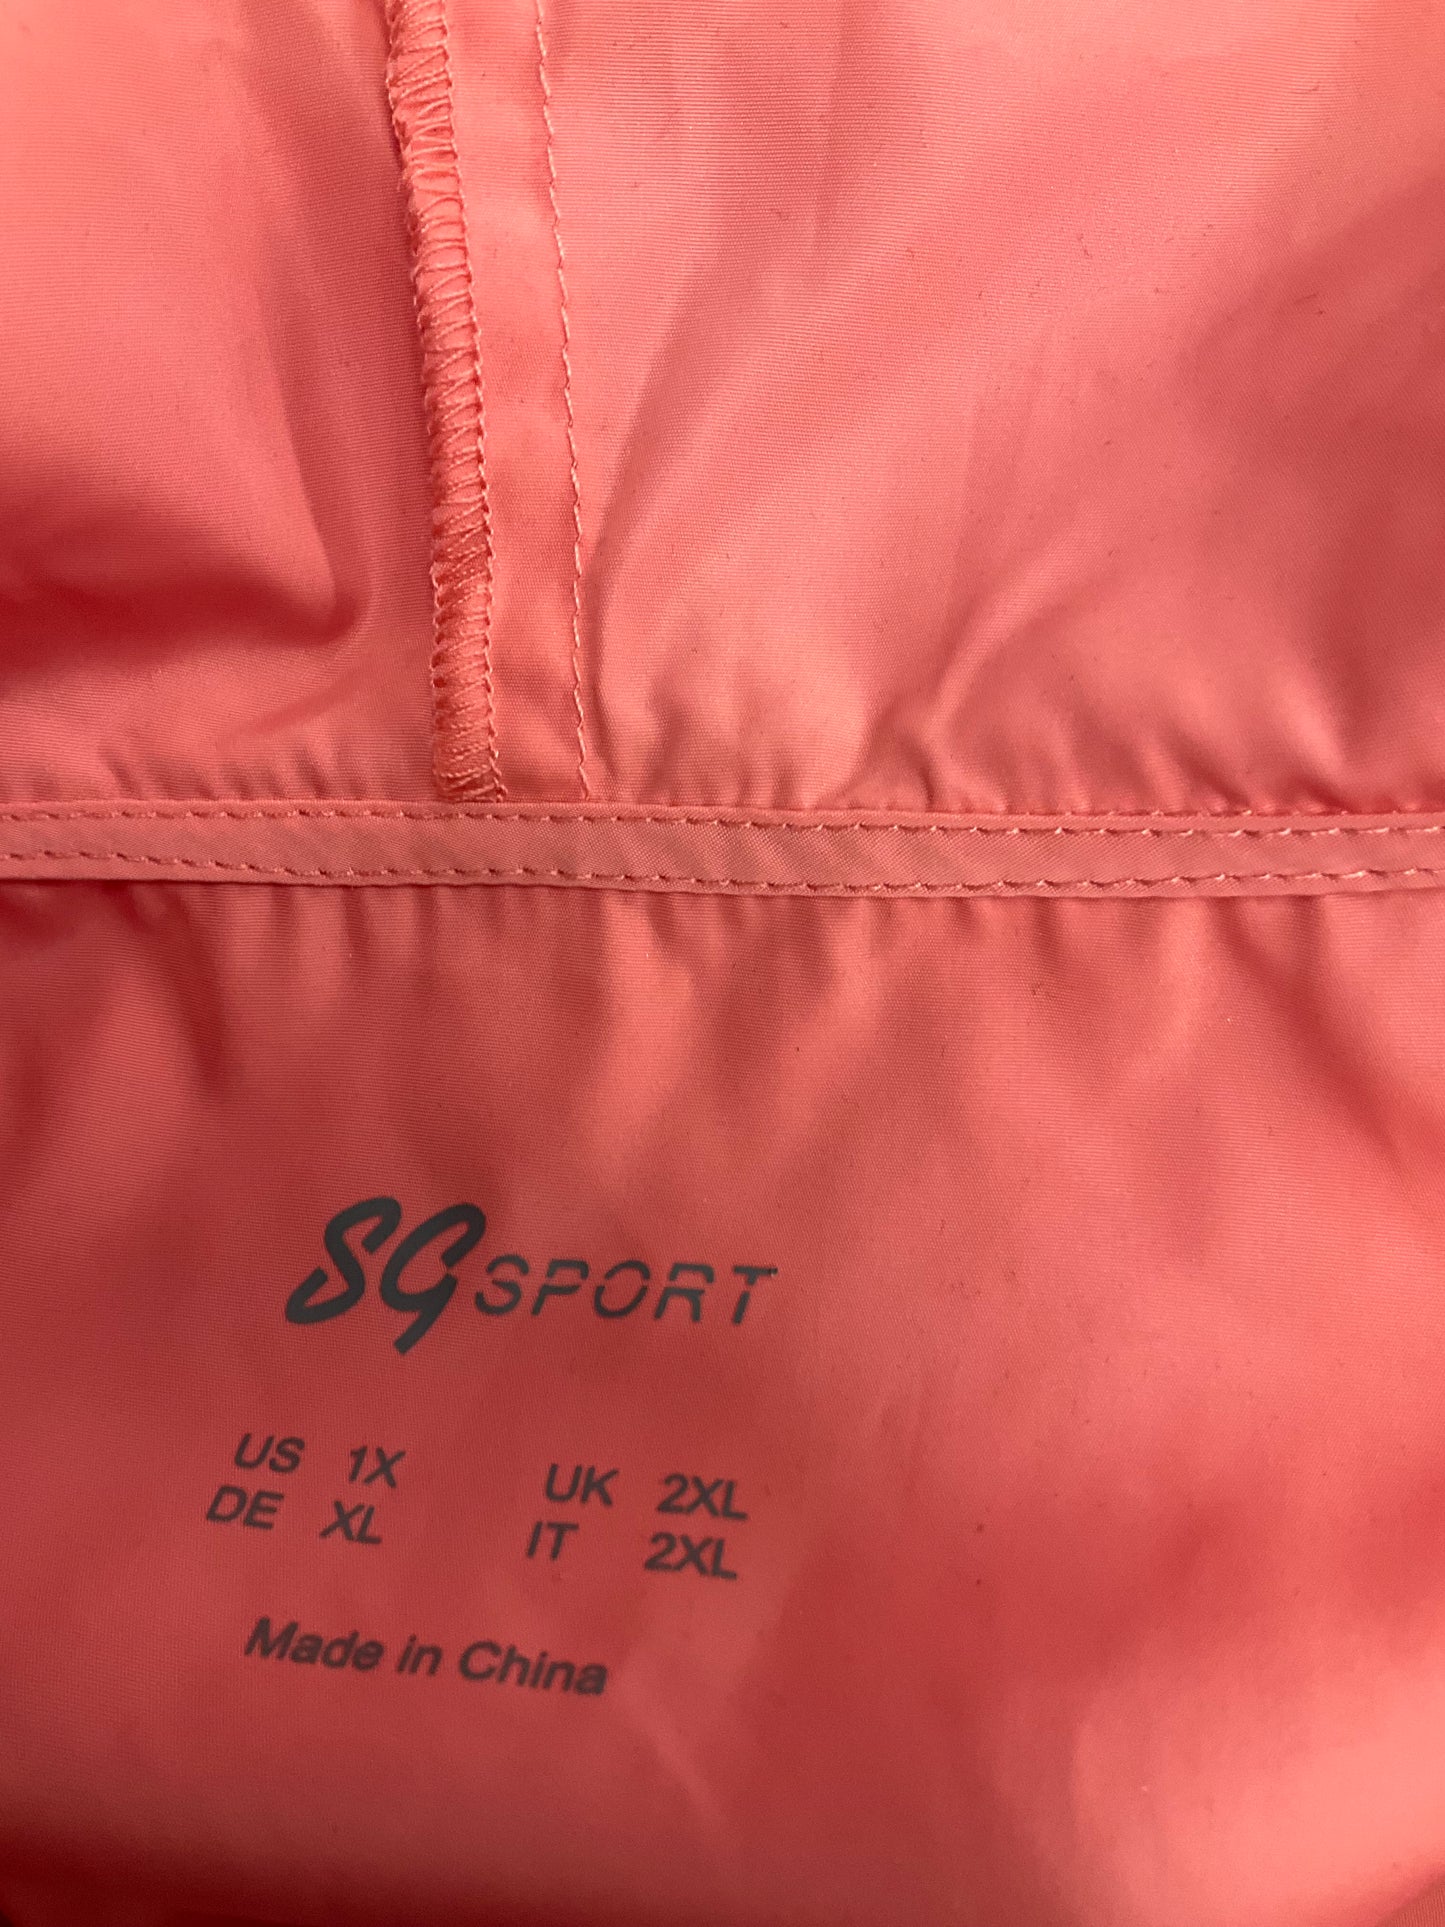 Jacket Windbreaker By Clothes Mentor  Size: 1x